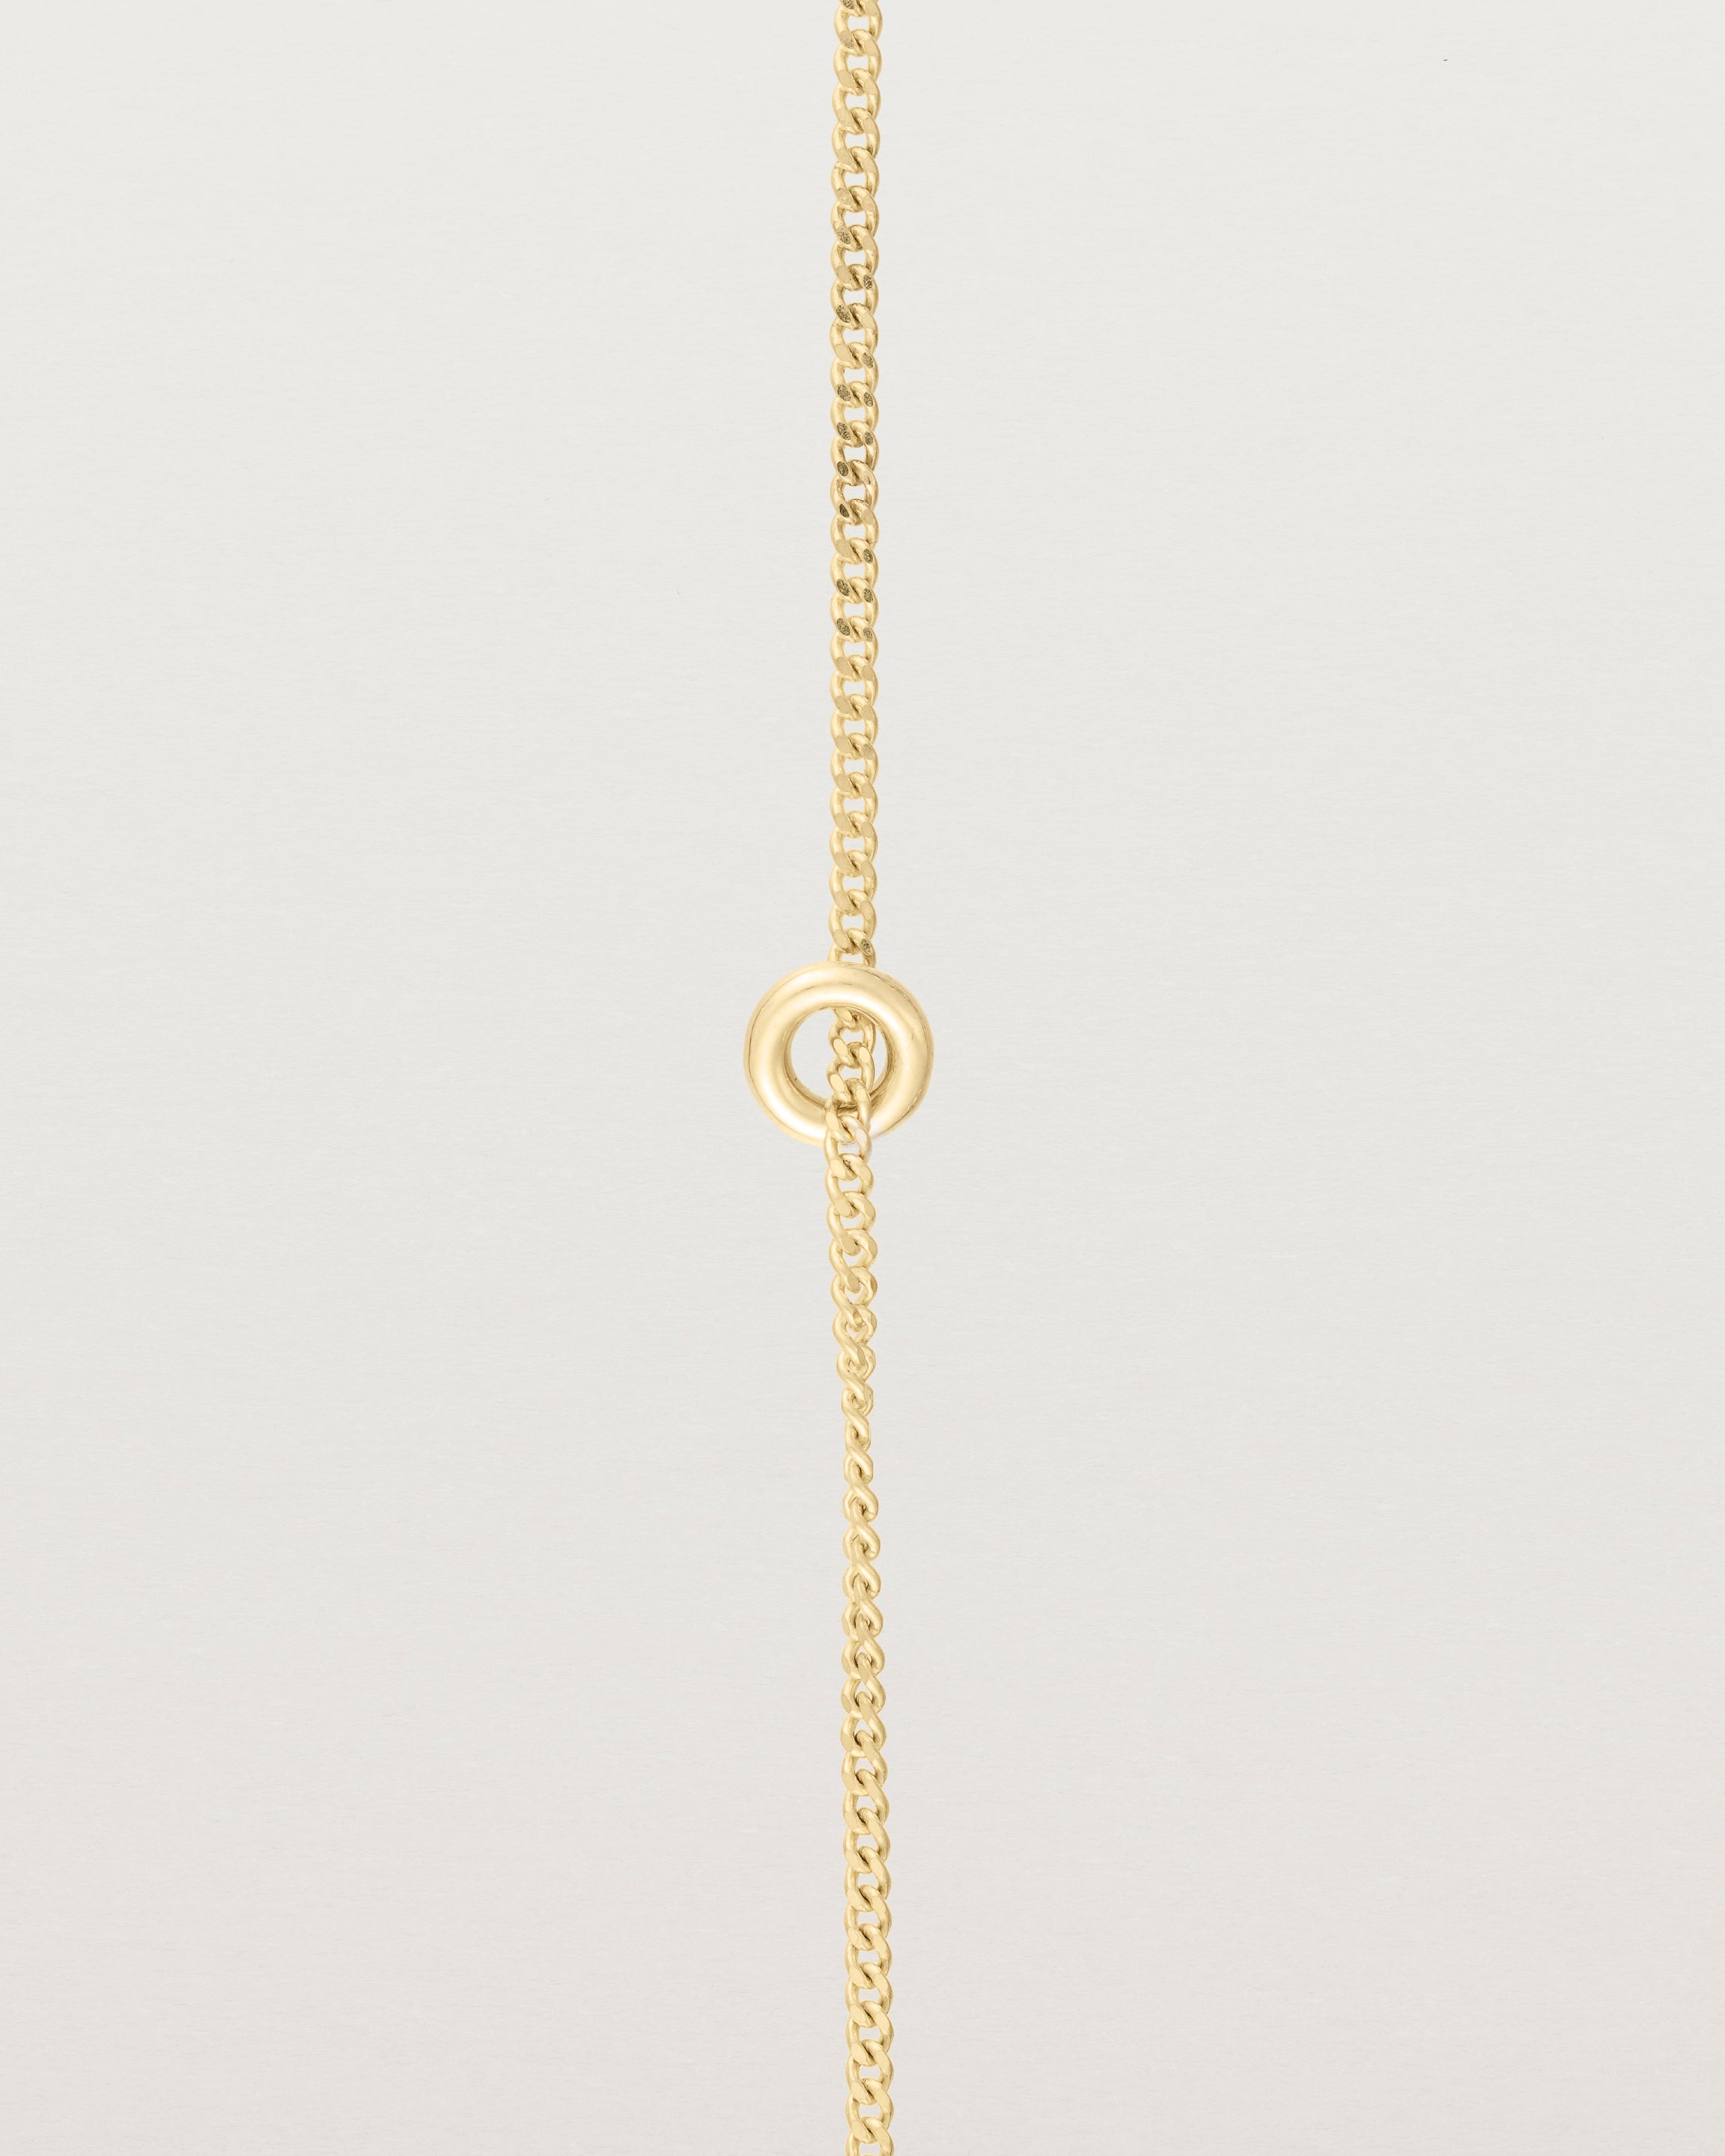 View of Aether Bracelet featuring one round charm in yellow gold.